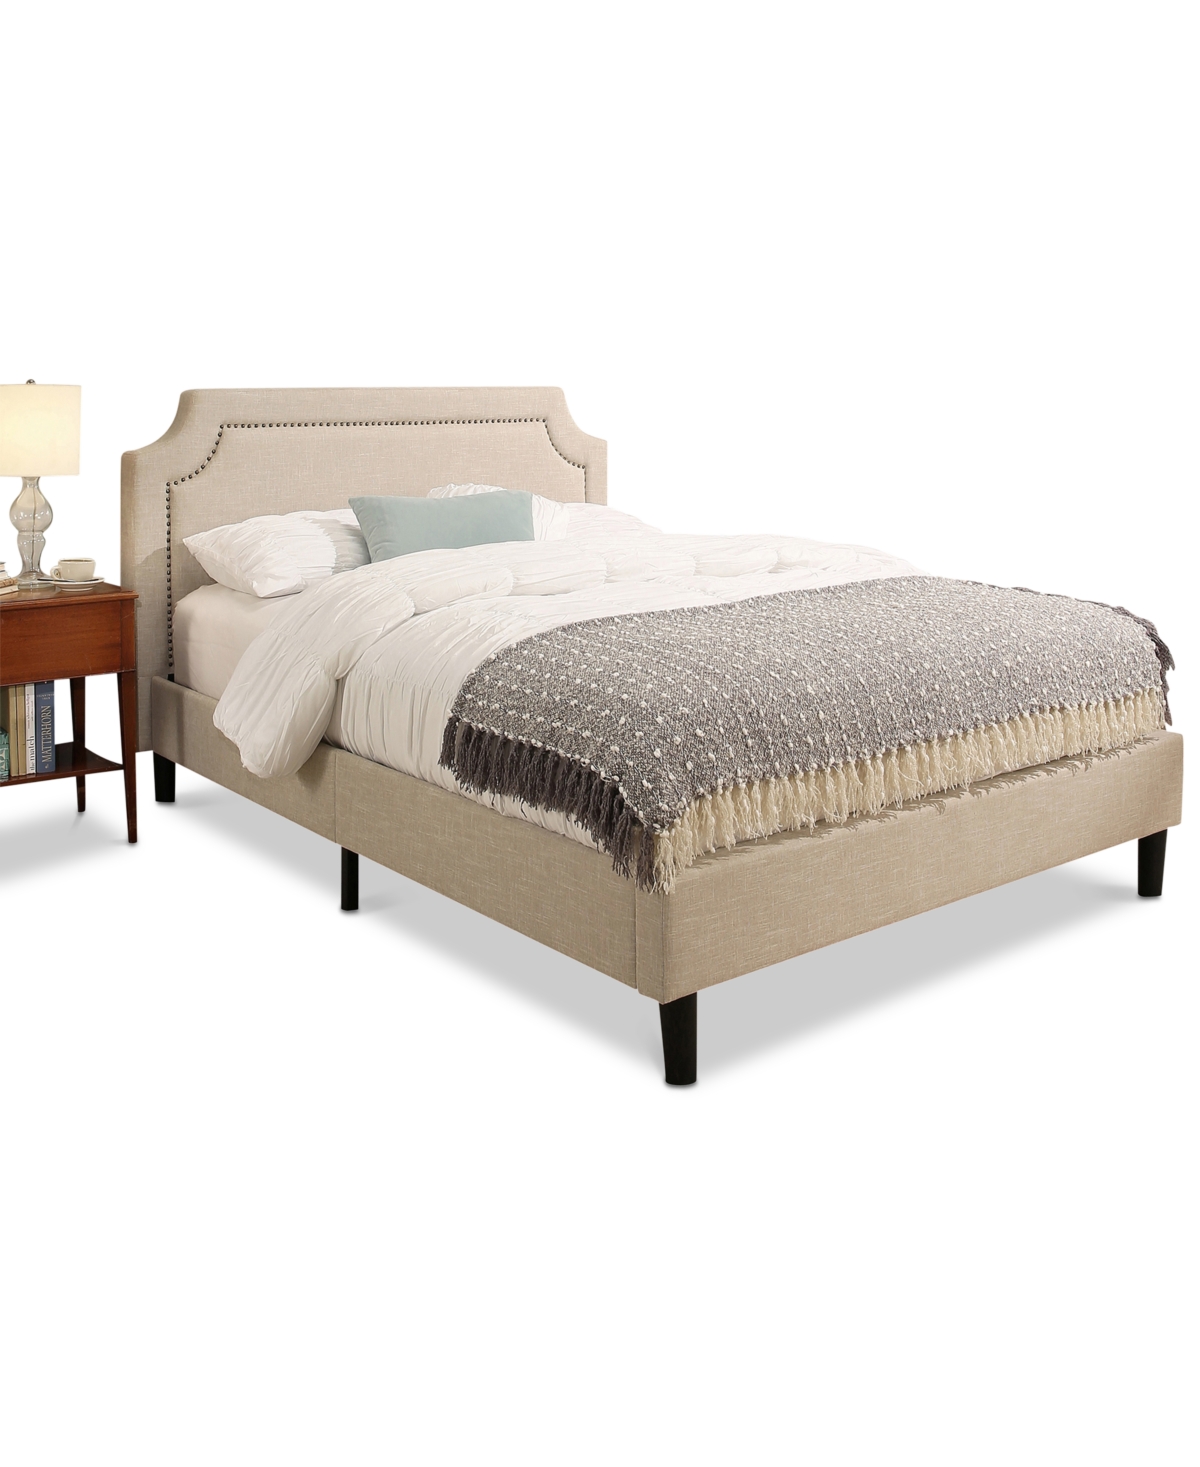 6504133 Bozza Upholstered Bed - Queen, Quick Ship sku 6504133